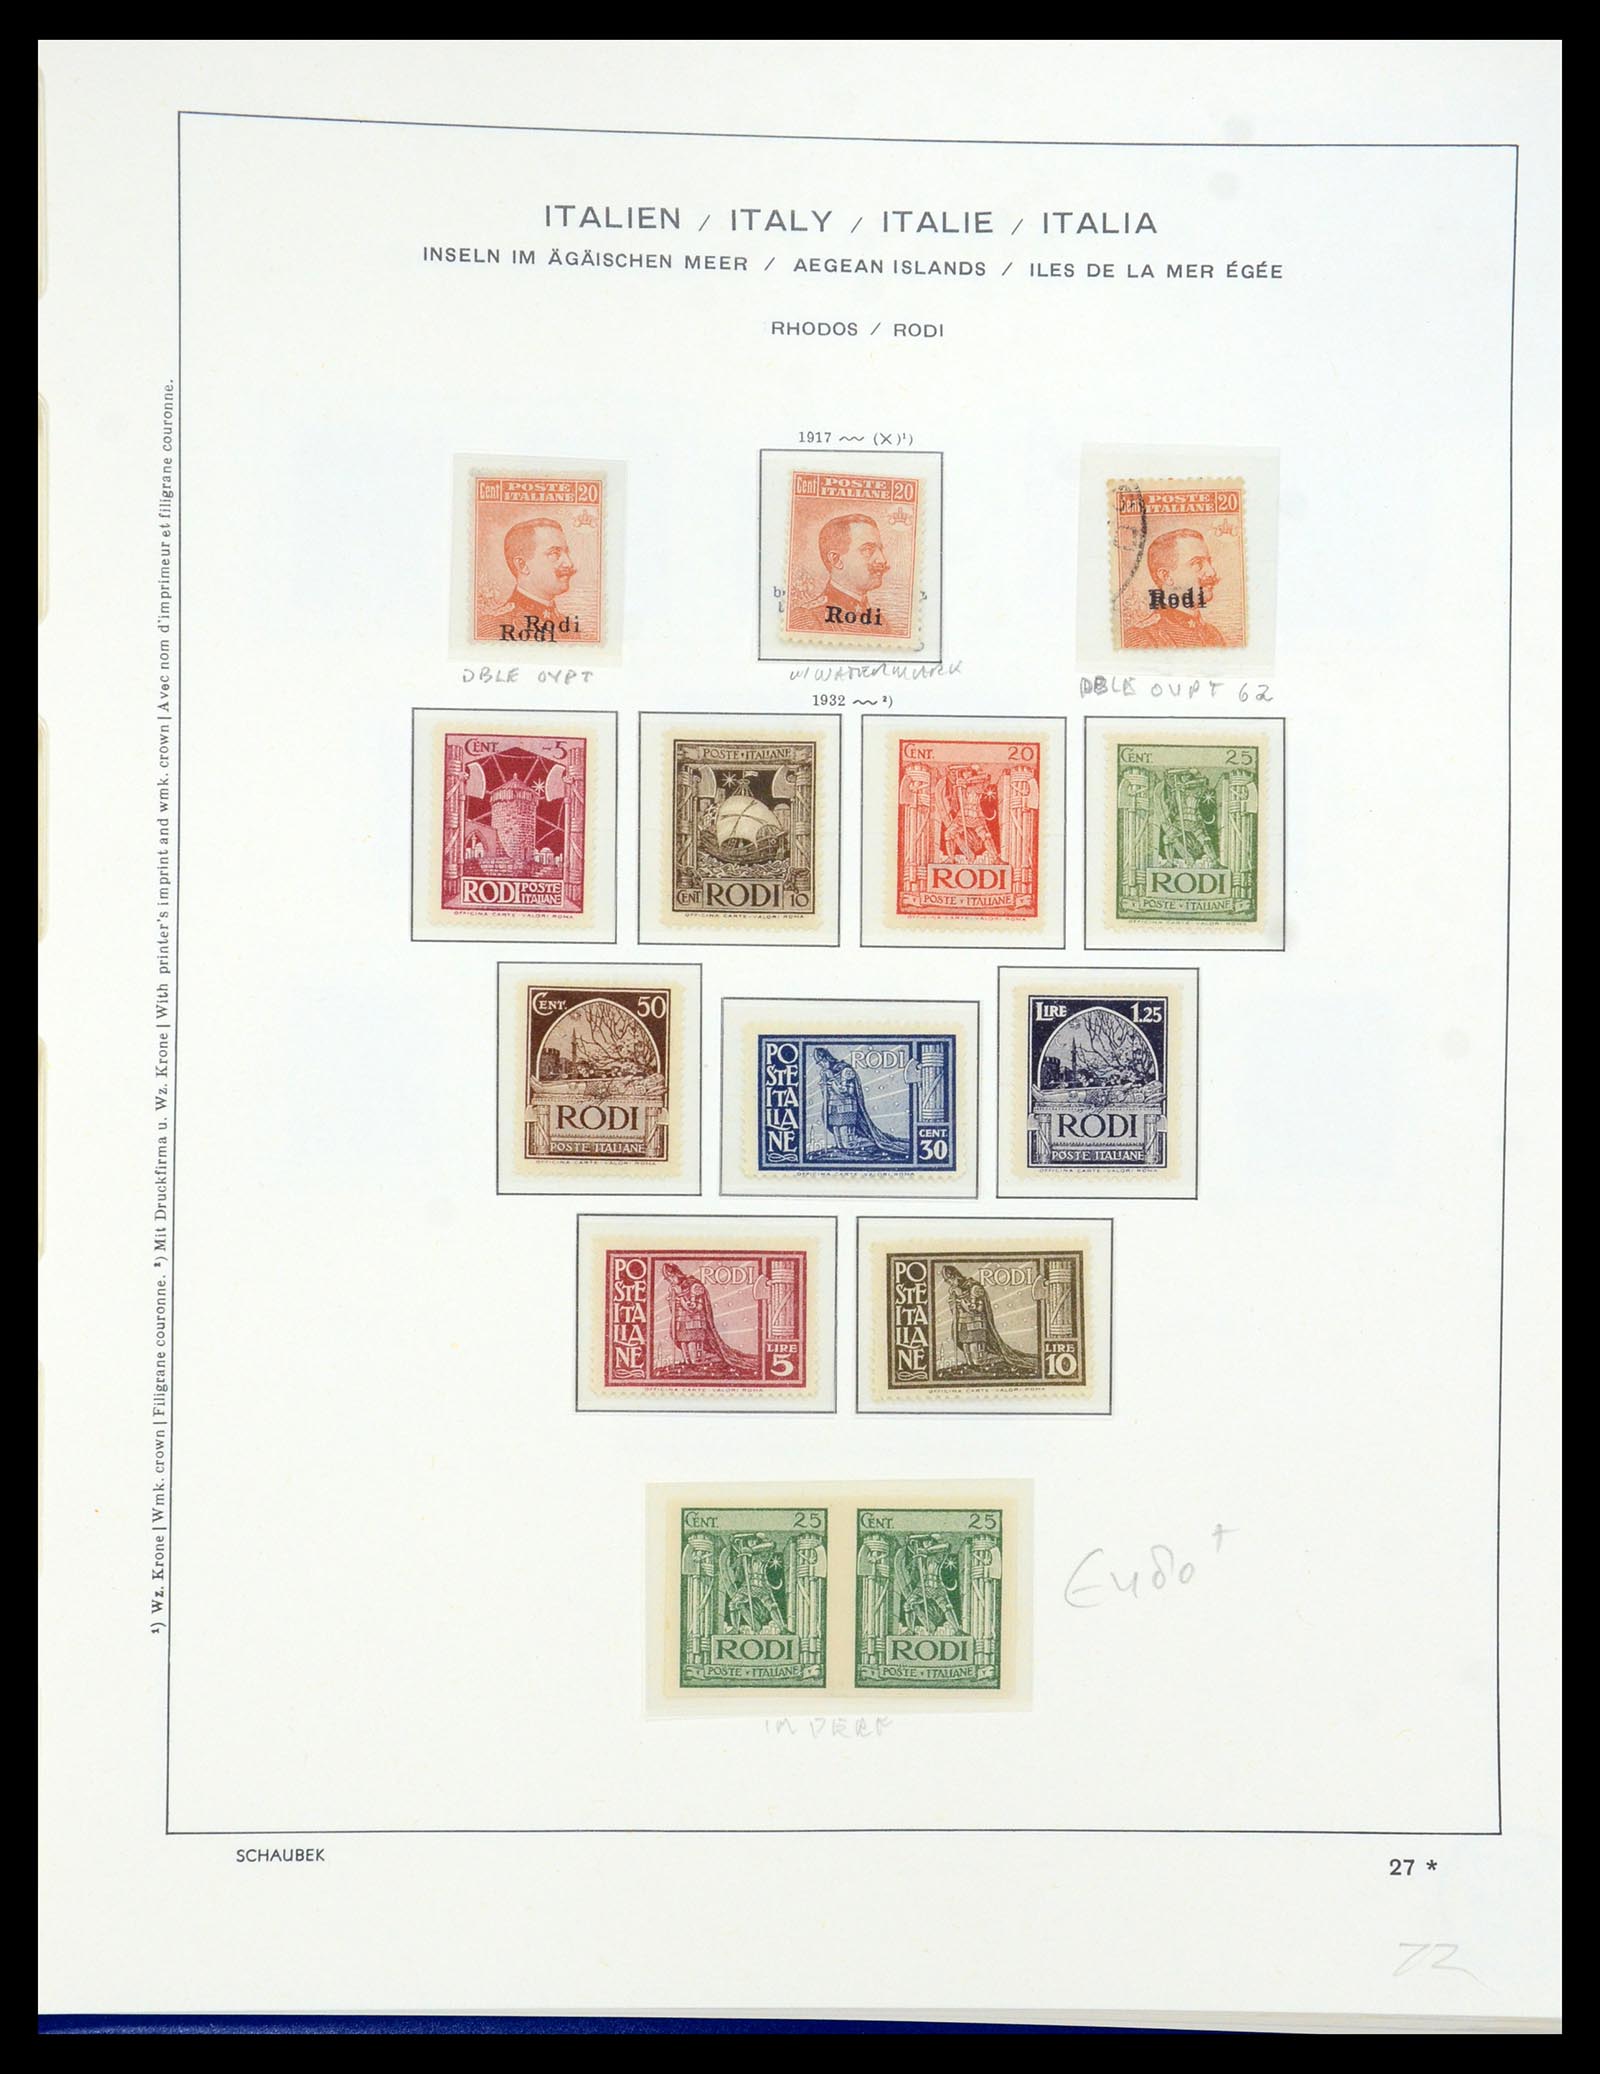 36181 037 - Stamp collection 36181 Italian Aegean Islands 1912-1941.